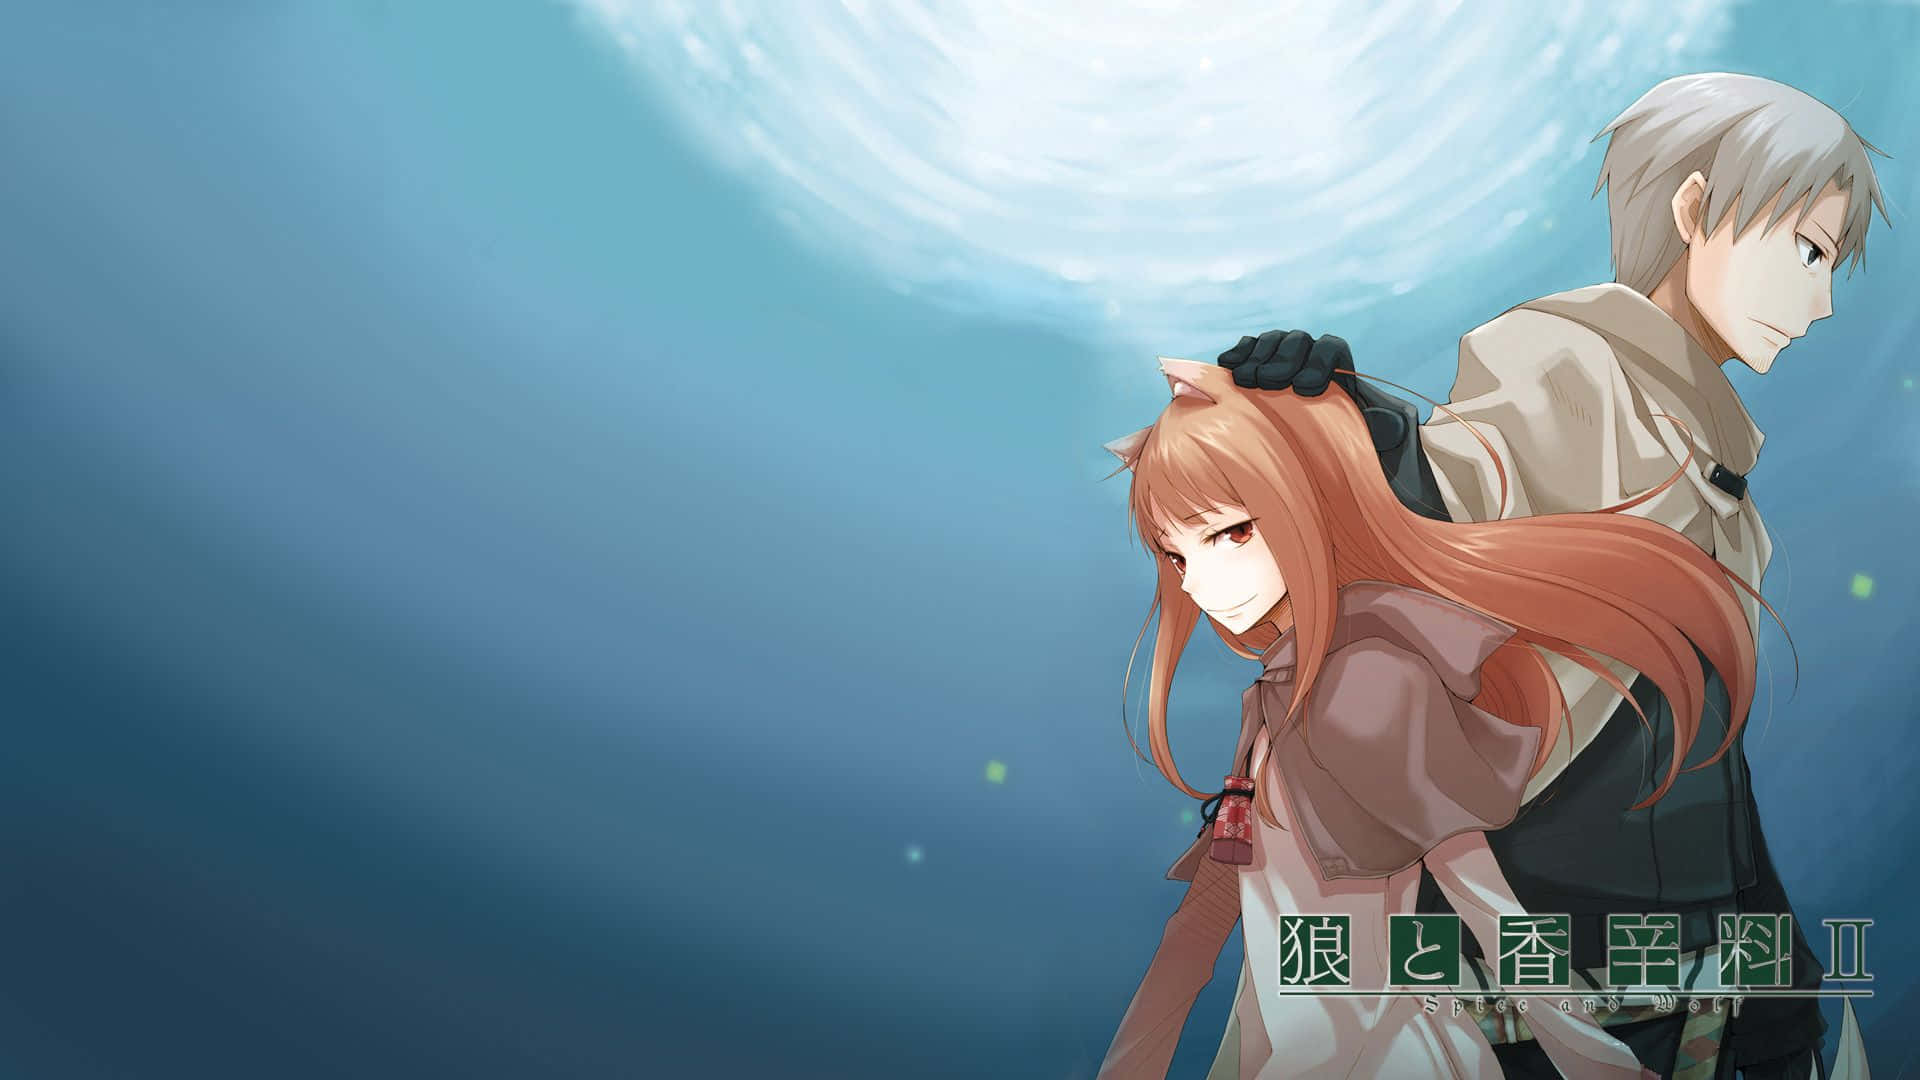 Spice And Wolf’s Holo beneath a sheer mountain peak Wallpaper